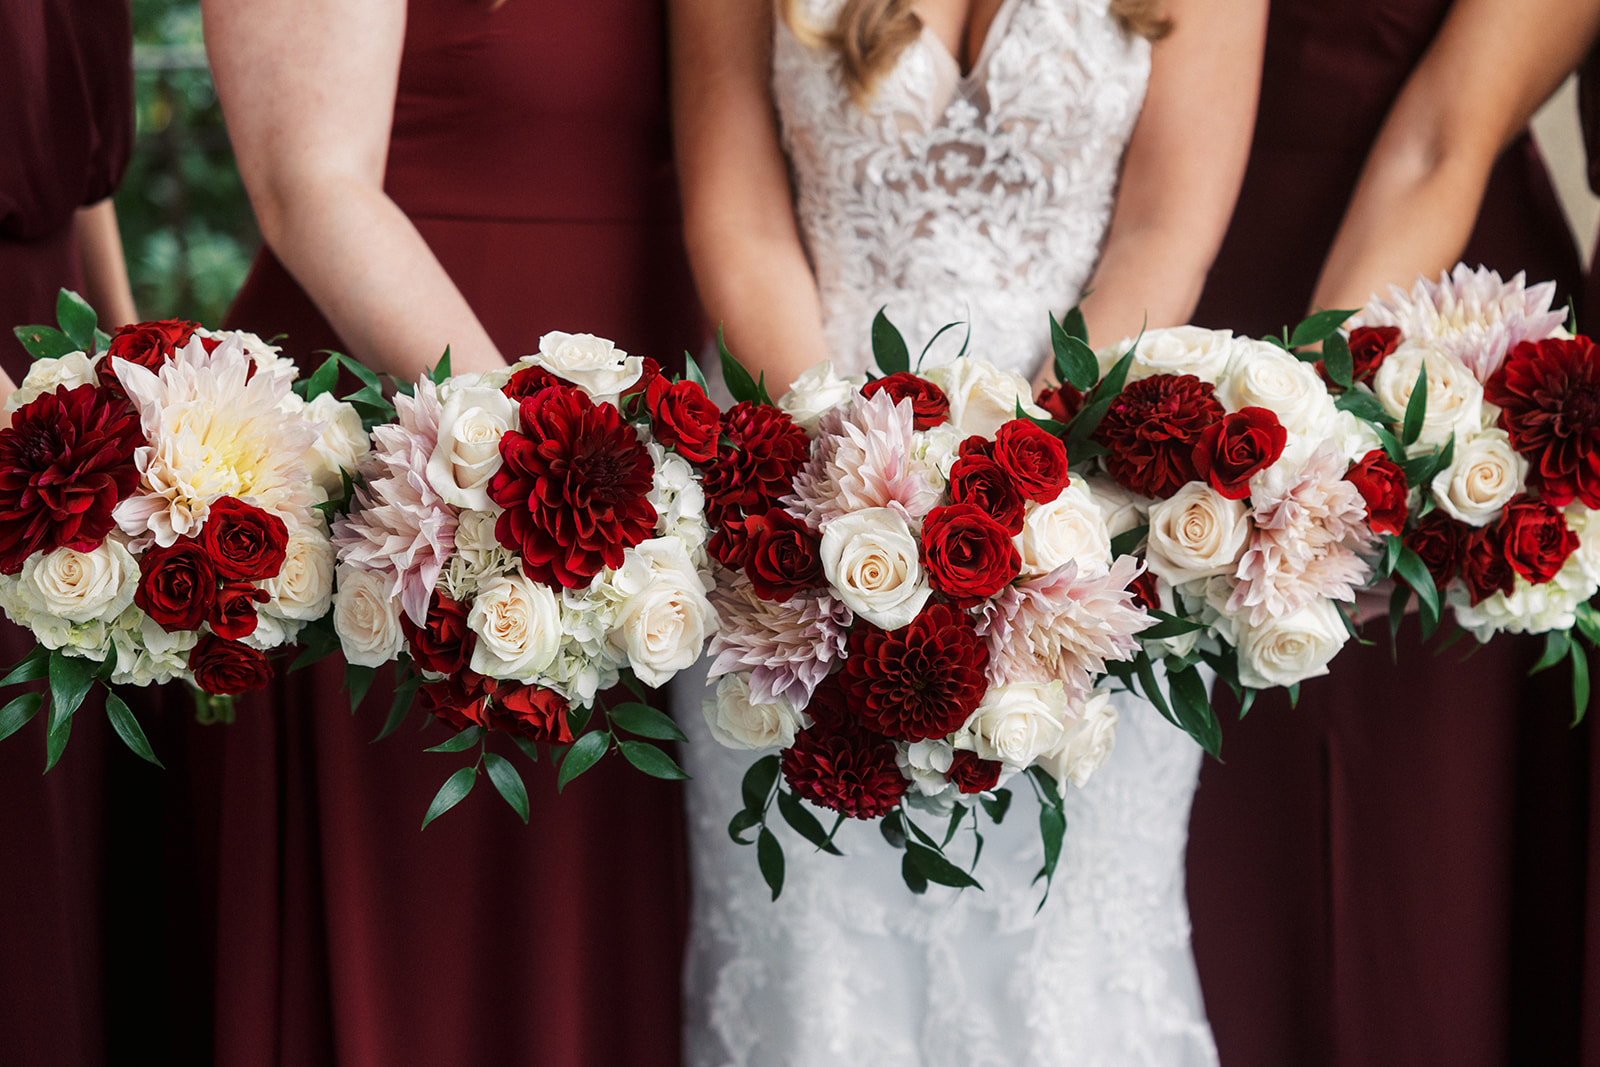 A bride stands in her lace dress holding her red and white bouquet in front of her with her bridesmaid's matching bouquets